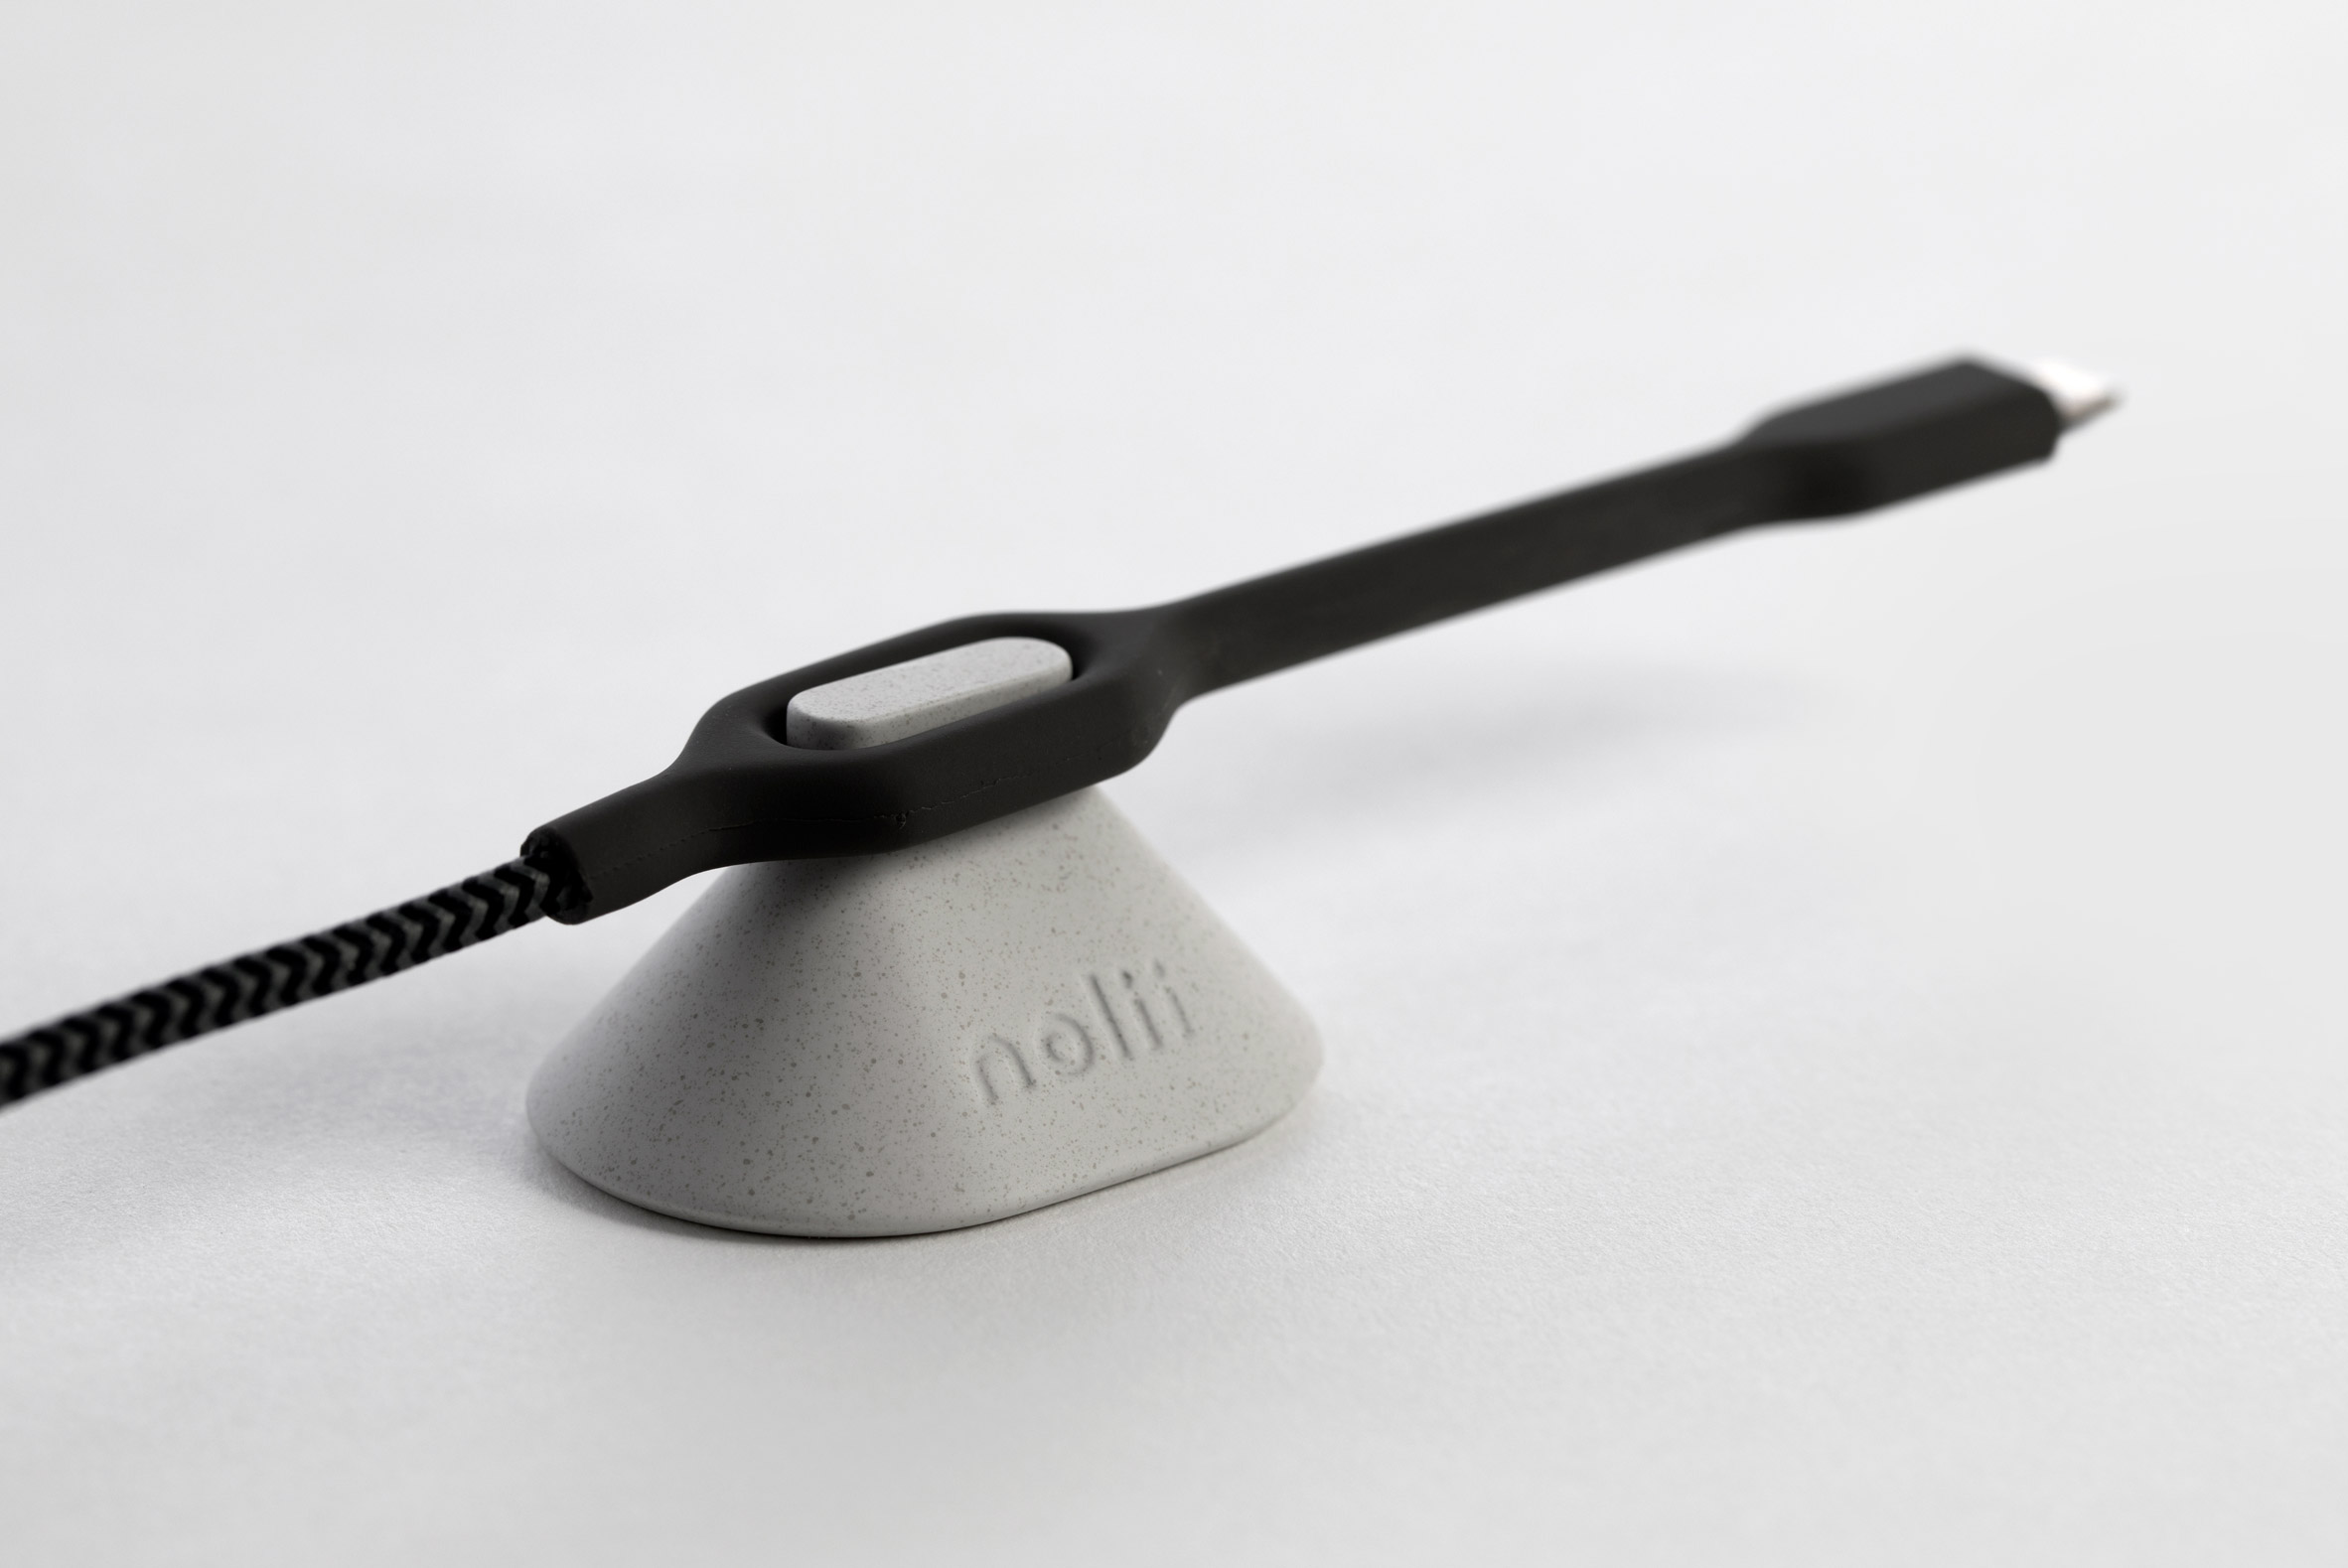 Benjamin Hubert aims to disrupt the tech market with new brand Nolii